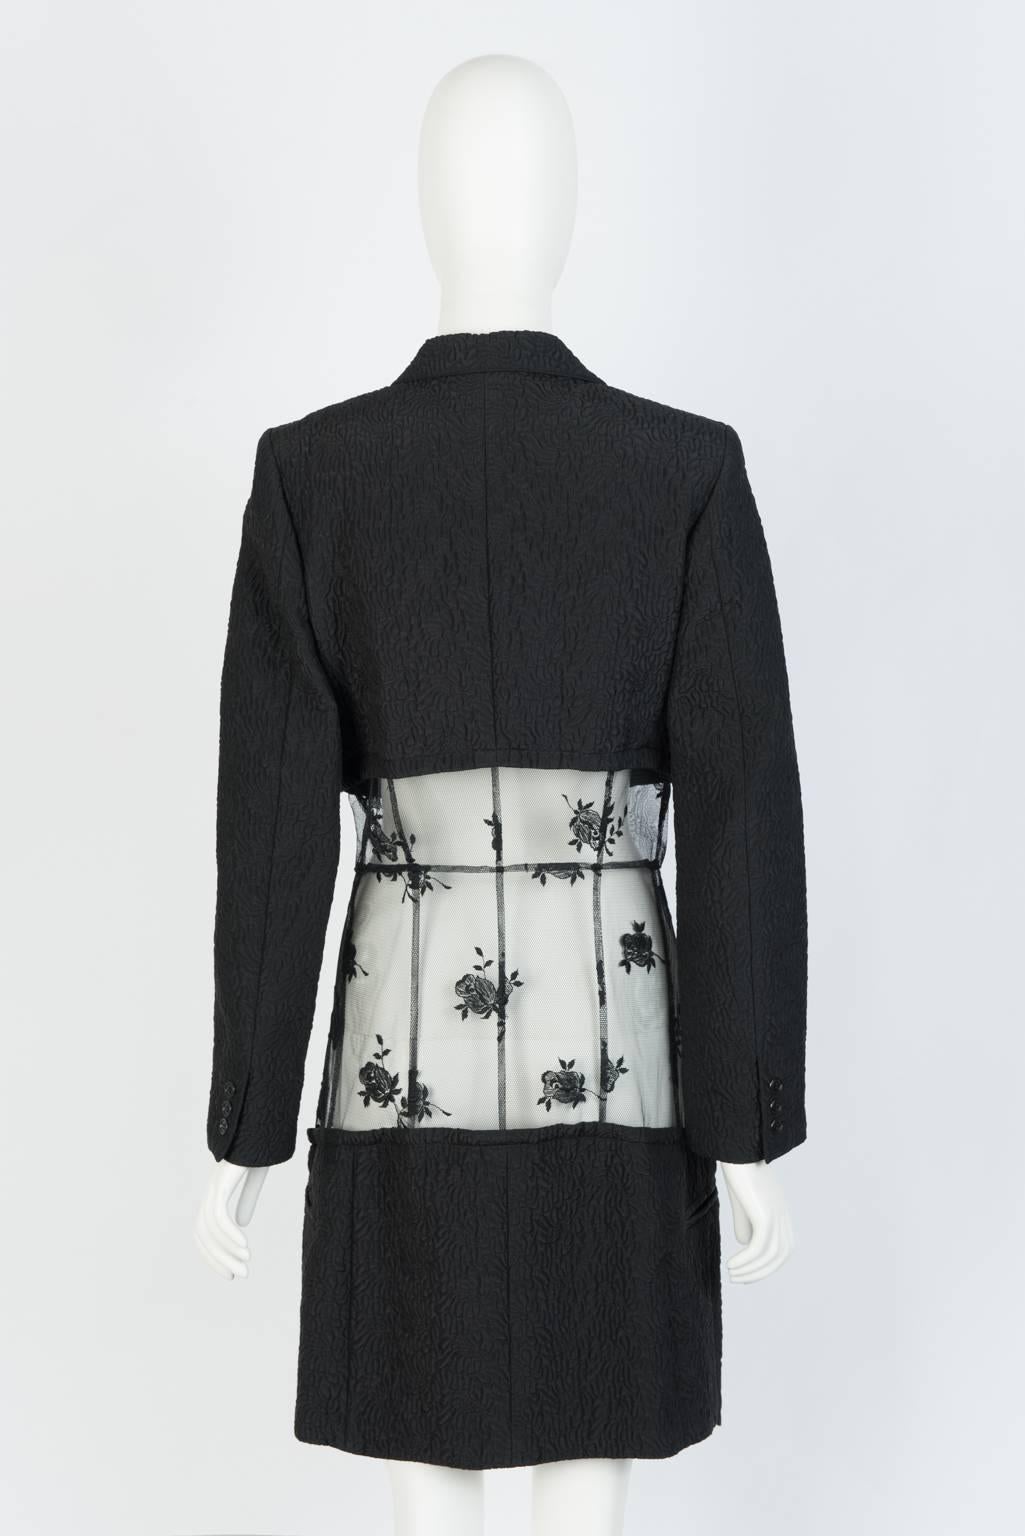 2001 COMME des GARCONS Tuxedo Coat With Sheer Panel In New Condition For Sale In Xiamen, Fujian